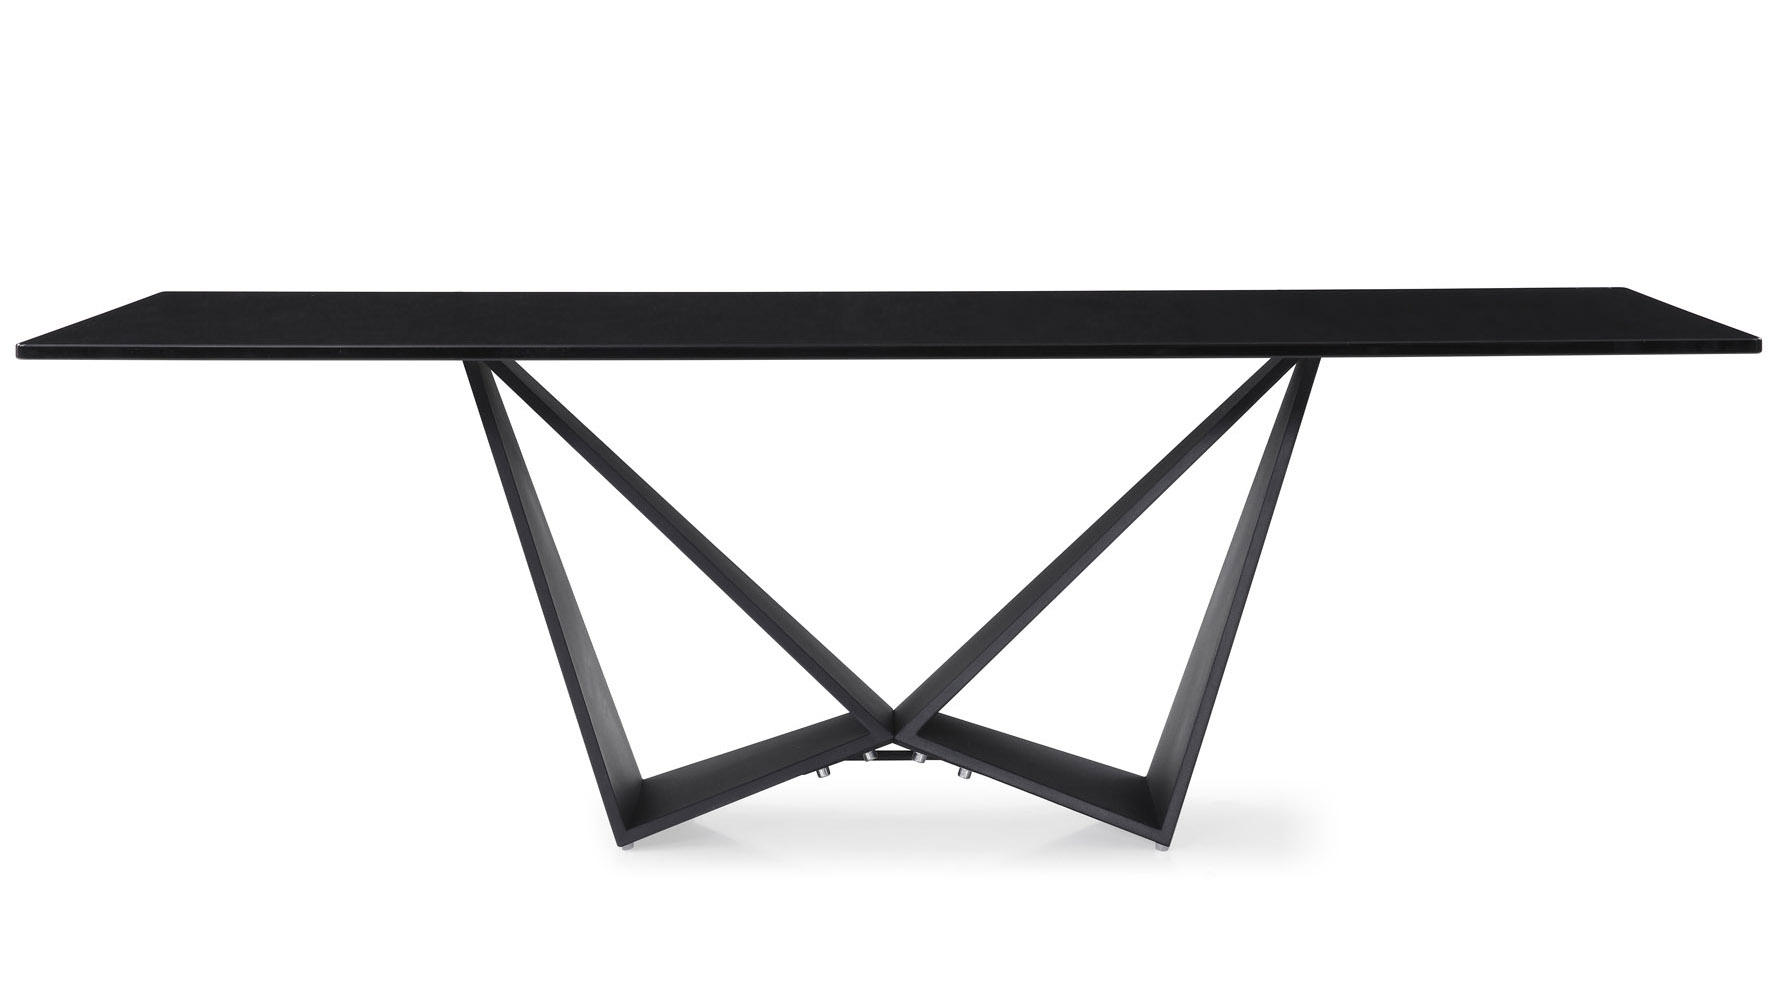 modern coffee table furniture for your living room now serra smoked glass black steel acrylic accent zuri inch legs sofa end tables covers narrow hallway bar height outdoor mirror